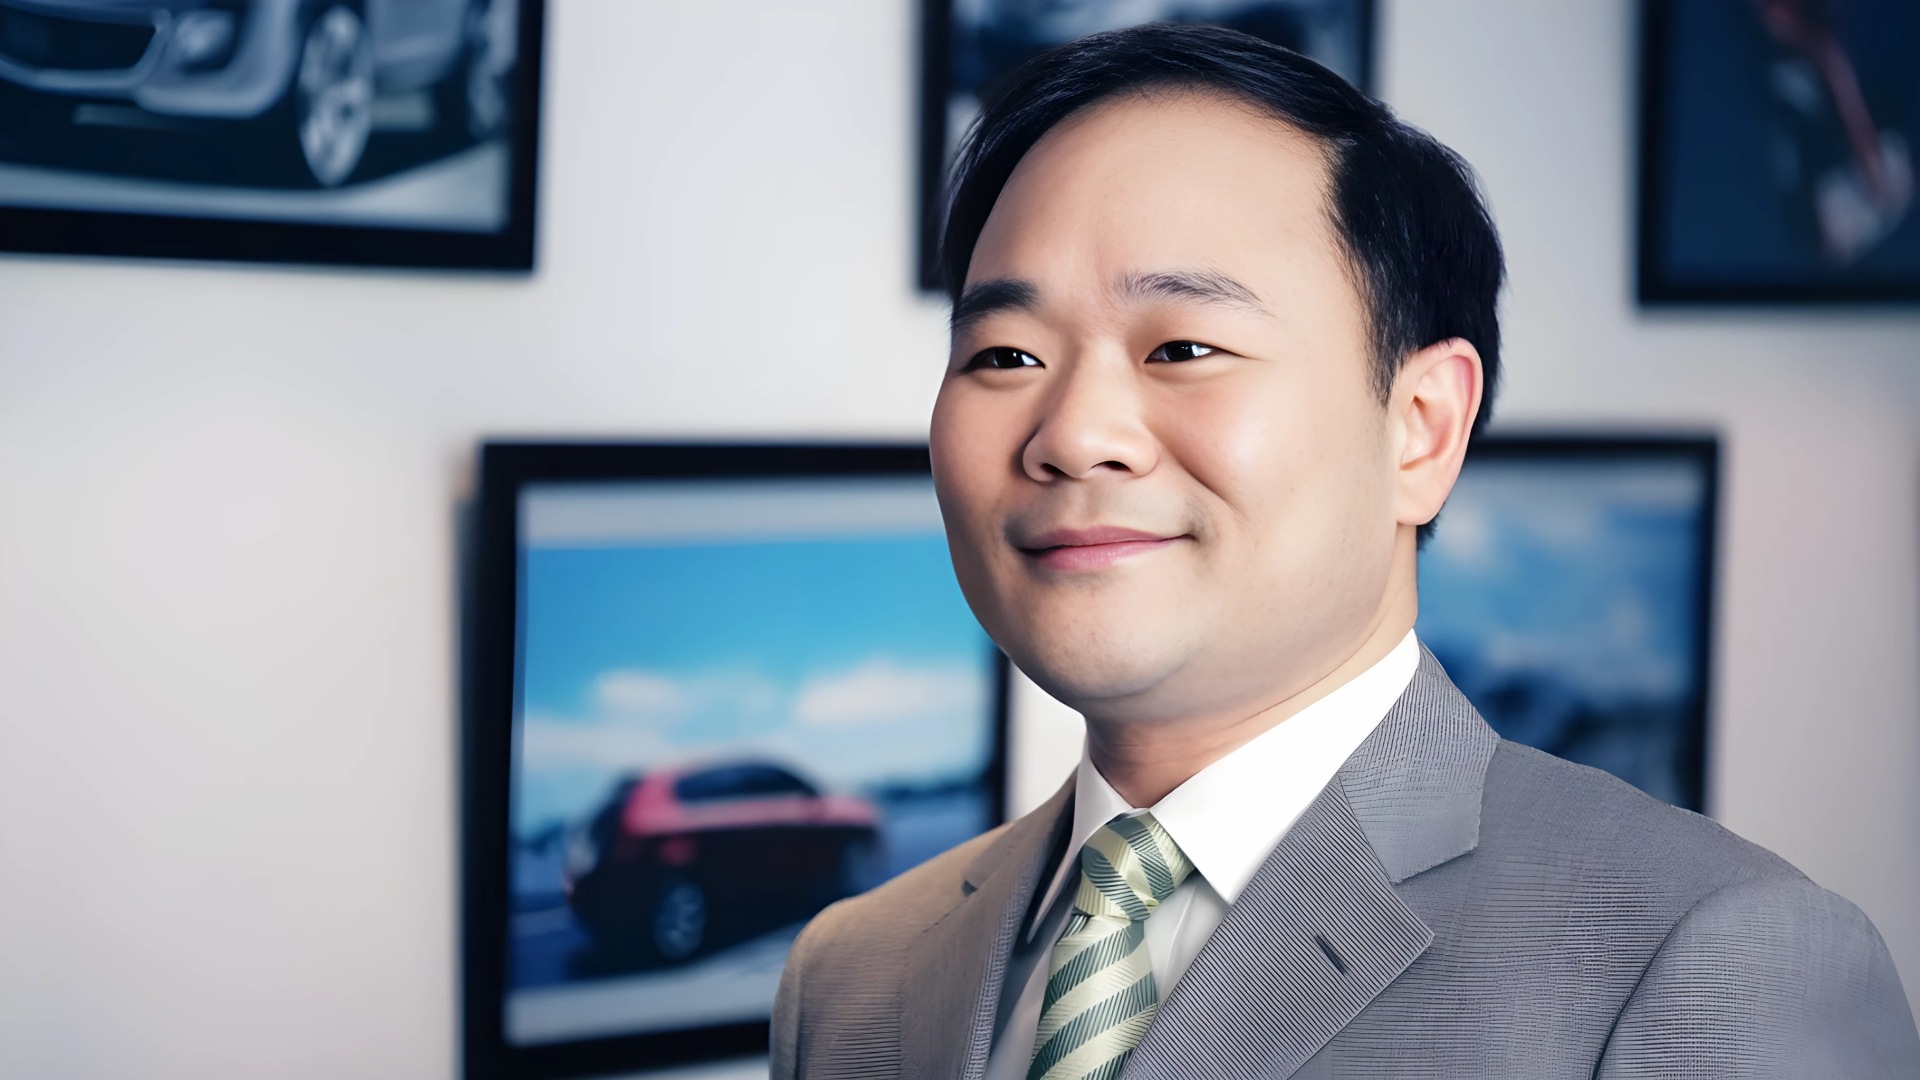 The Chairman of Zhejiang Geely Holding Group, Eric Li (Li Shufu) (Credits Zhejiang Geely Holding Group)